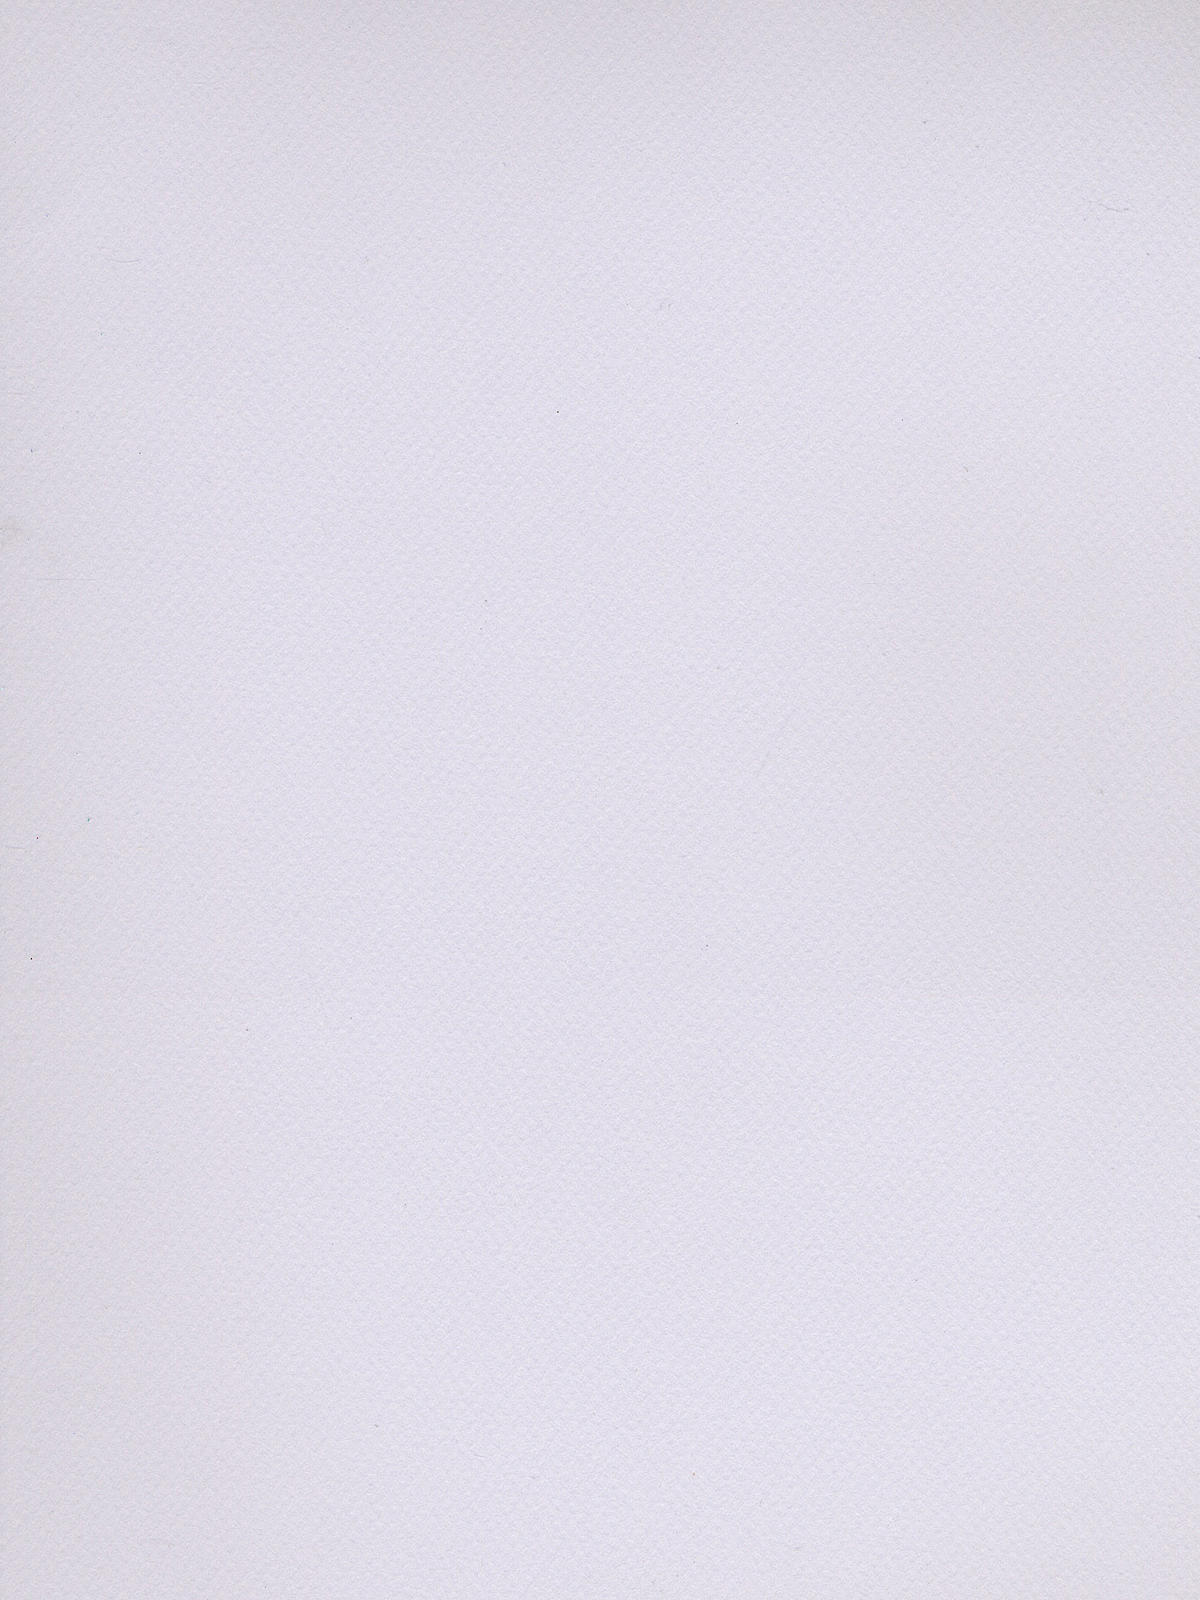 Mi-teintes Tinted Paper Lilac 19 In. X 25 In.